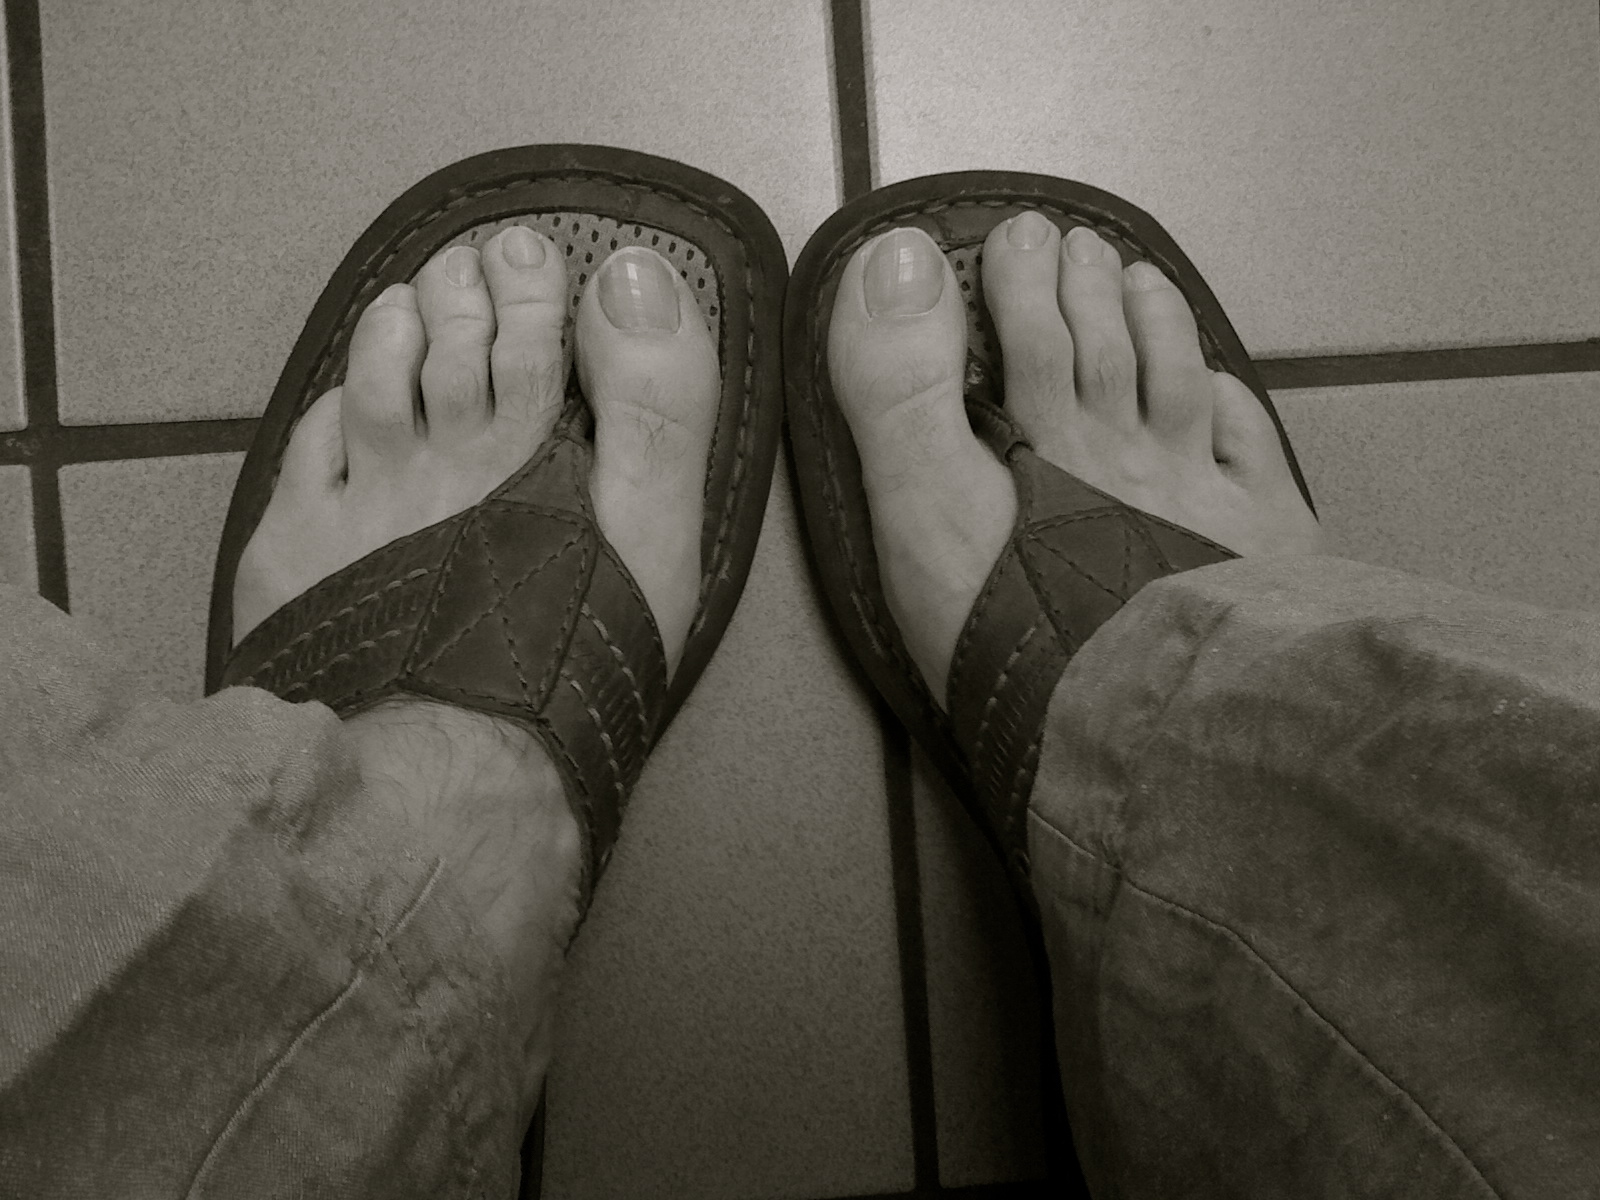 ... and comfy, airy and light, My Brown Jesus Sandals, fit me just right